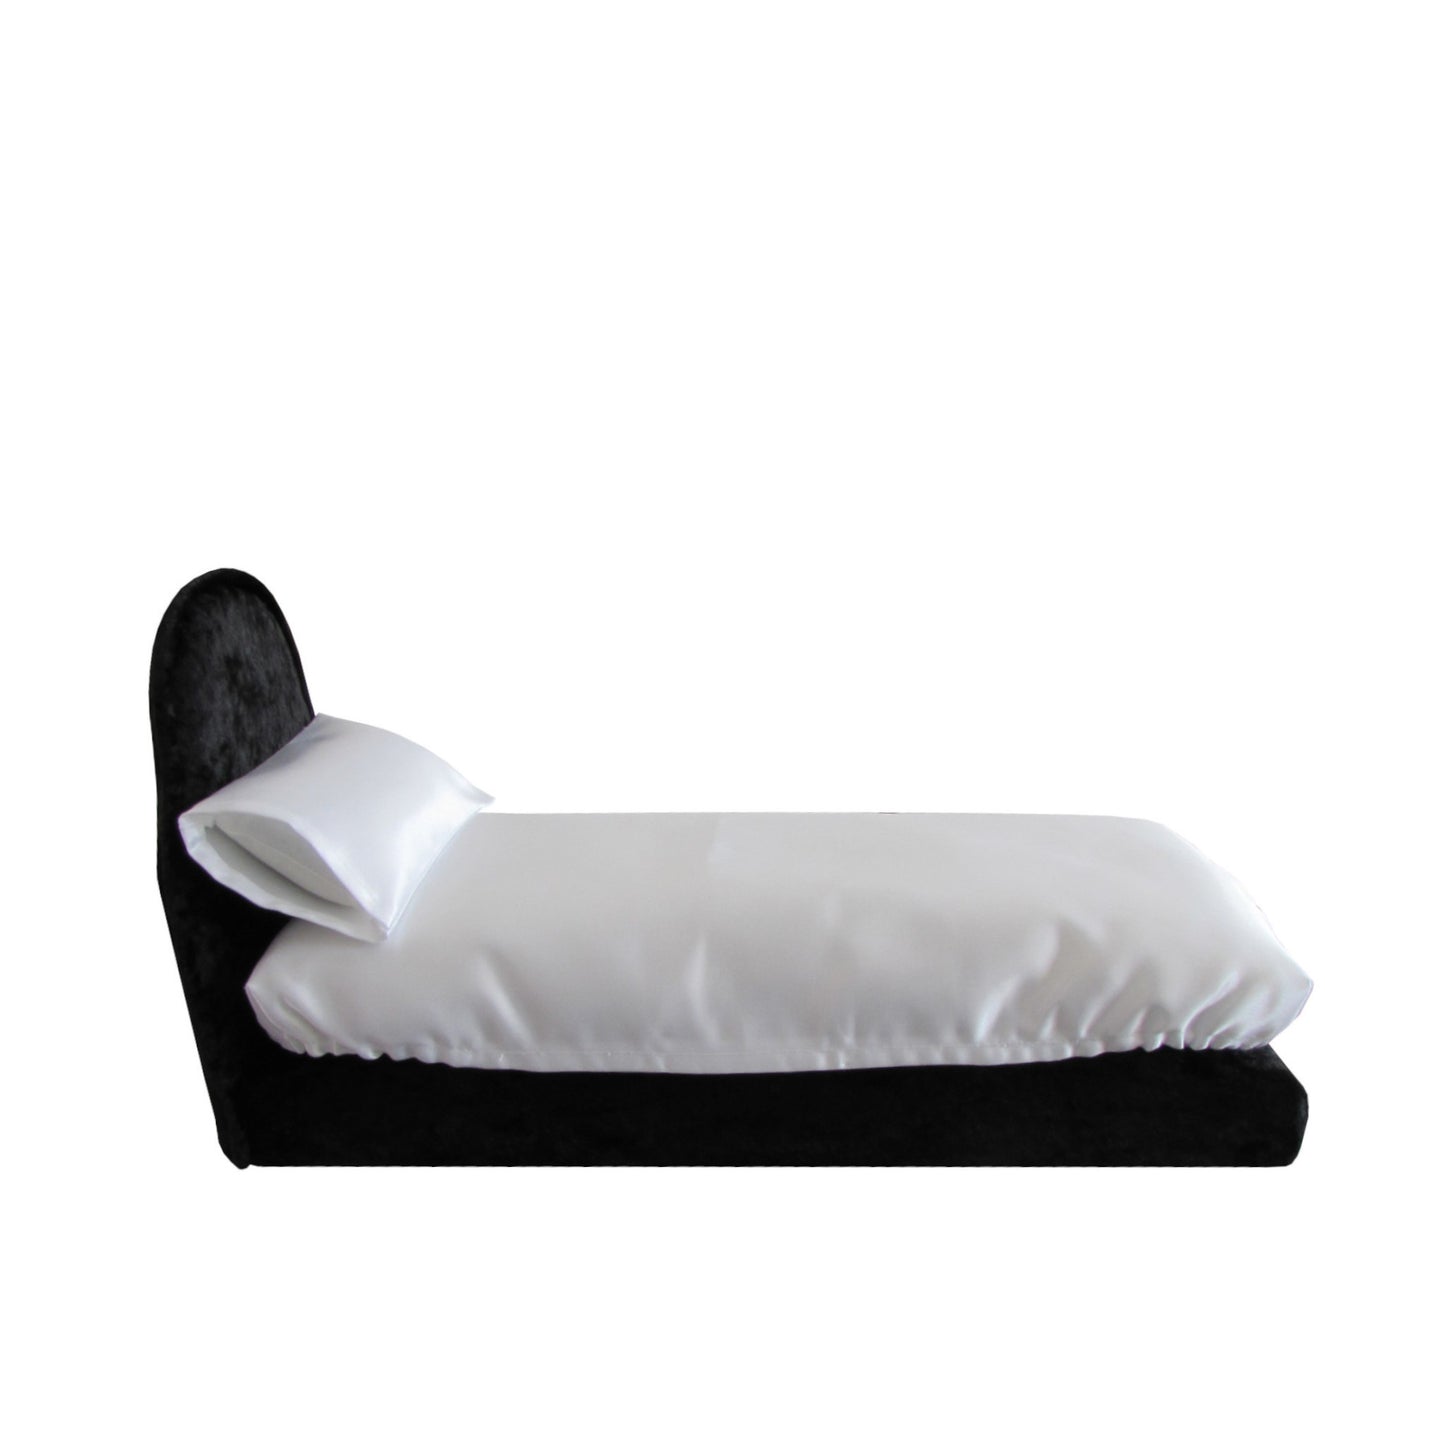 White Satin Doll Fitted Sheet, Pillow, and Black Crushed Velvet Doll Bed for 11.5-inch and 12-inch dolls